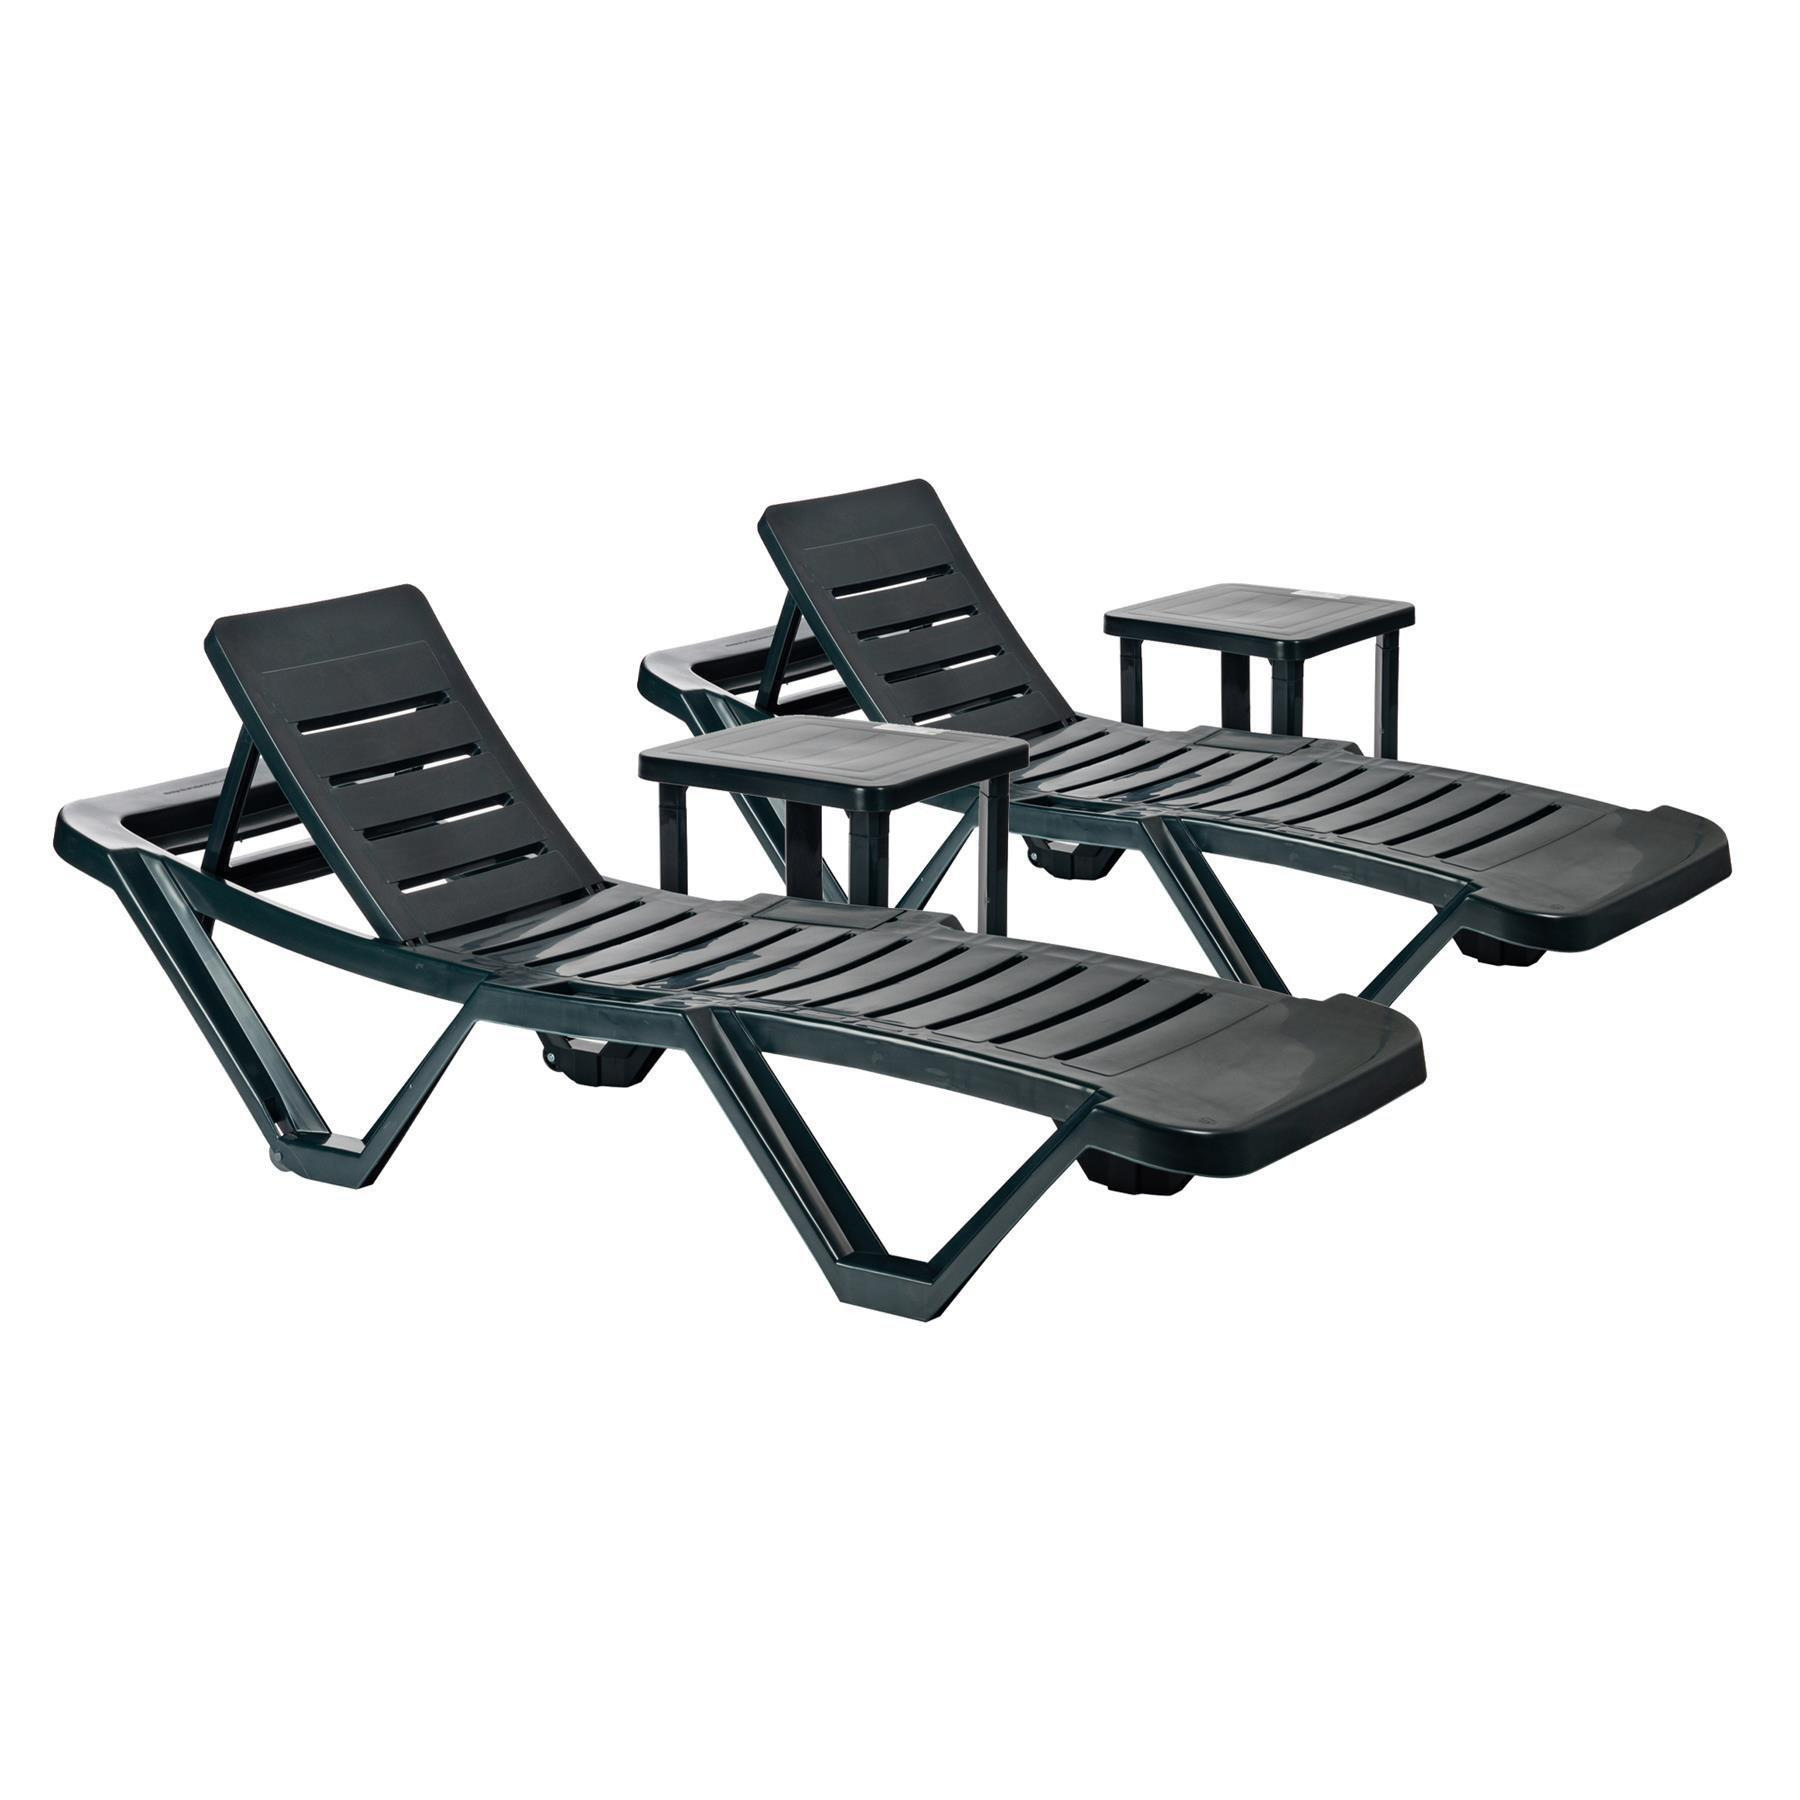 4 Piece Master Sun Loungers & Side Tables Set - image 1